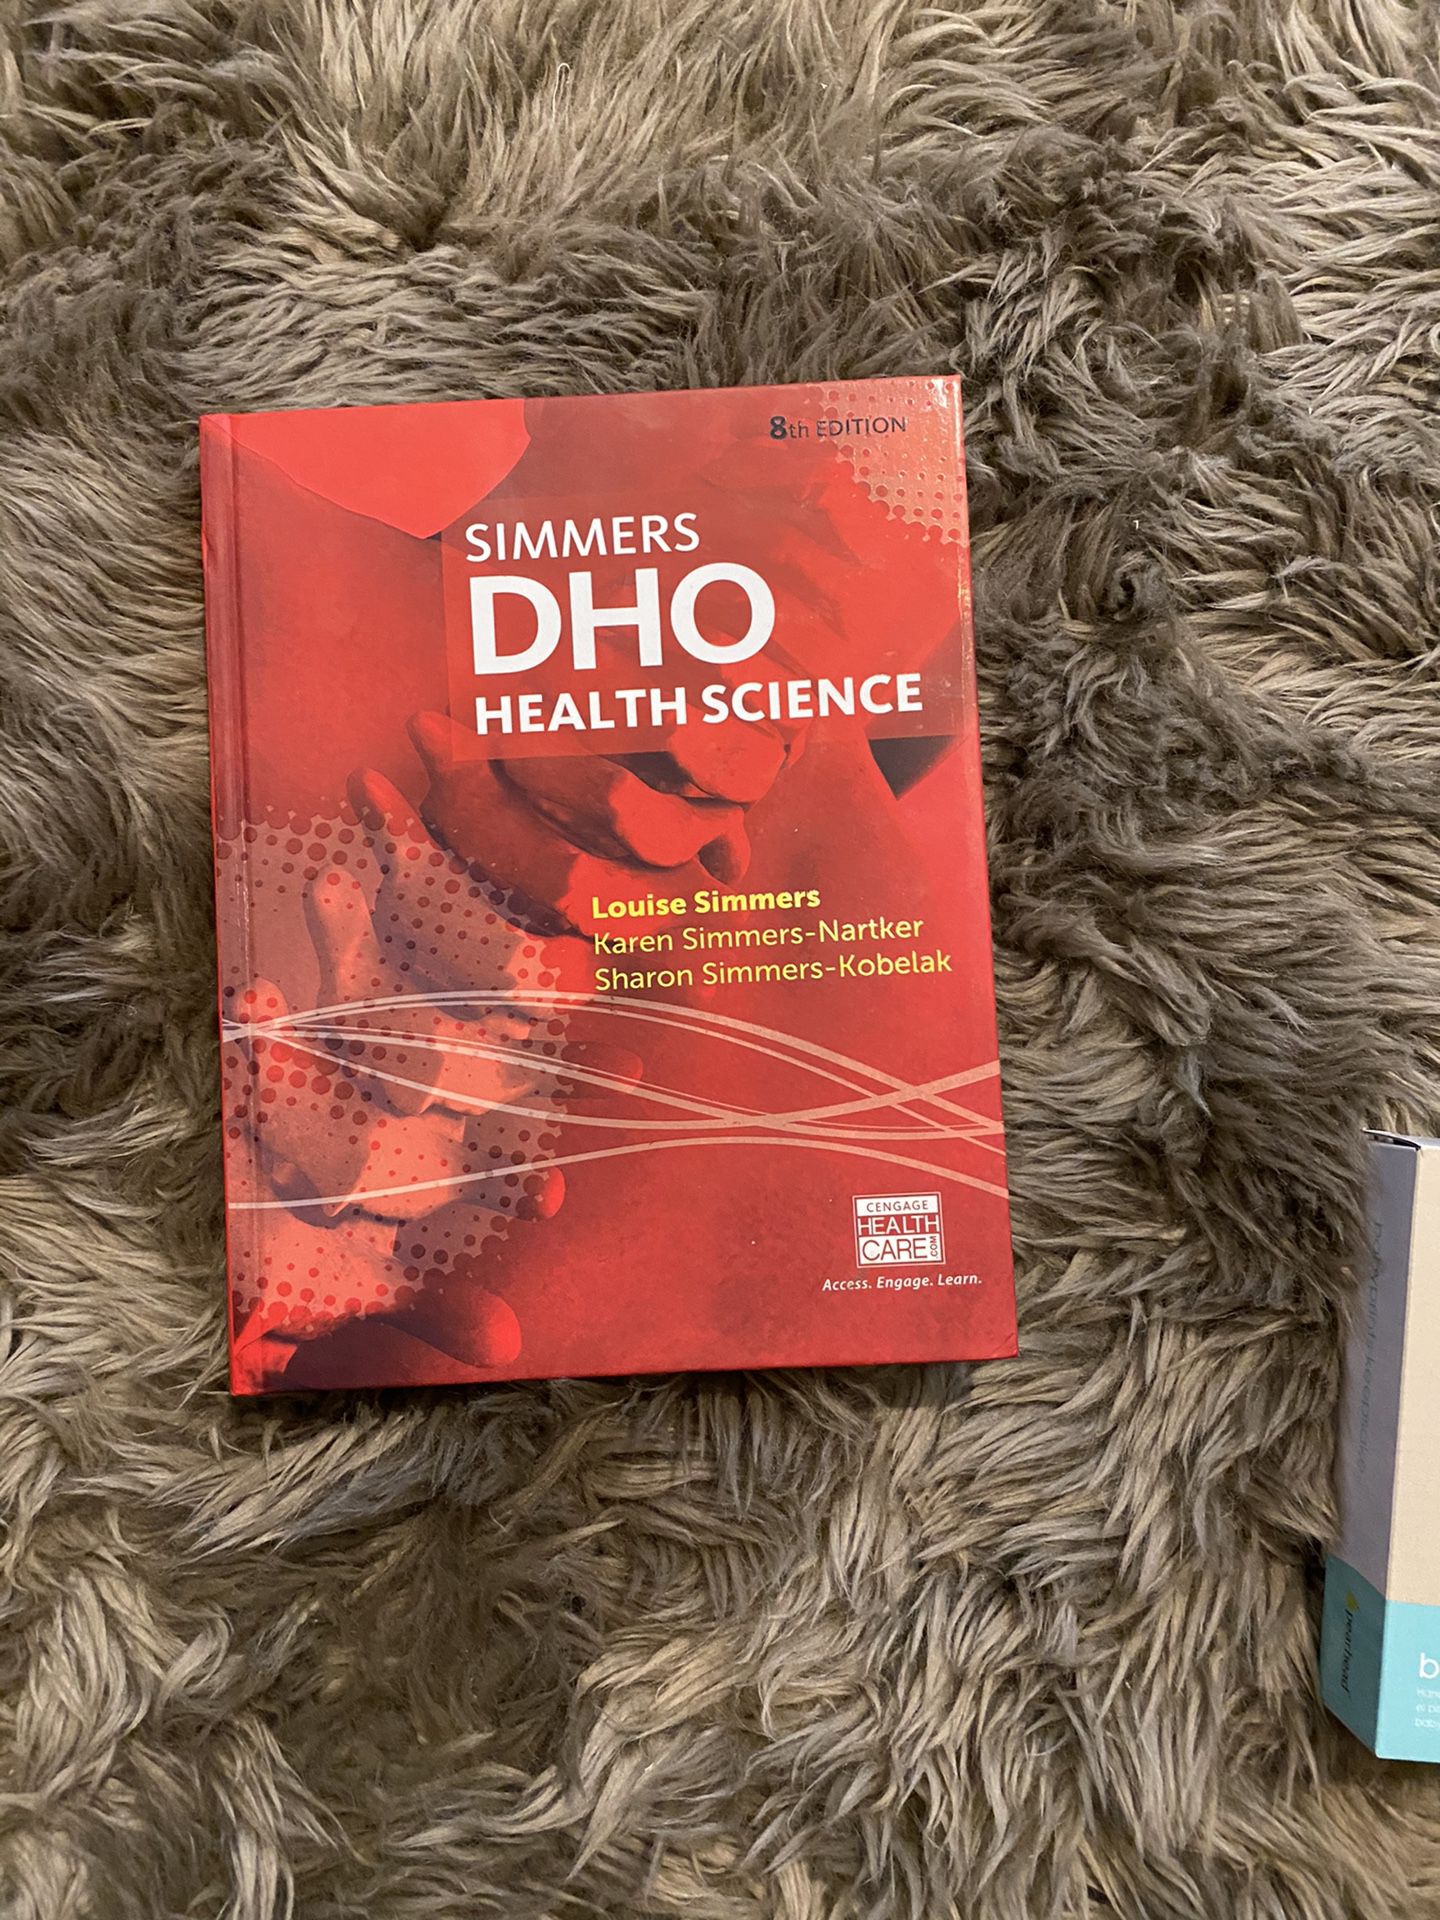 DHO health science book 8th edition